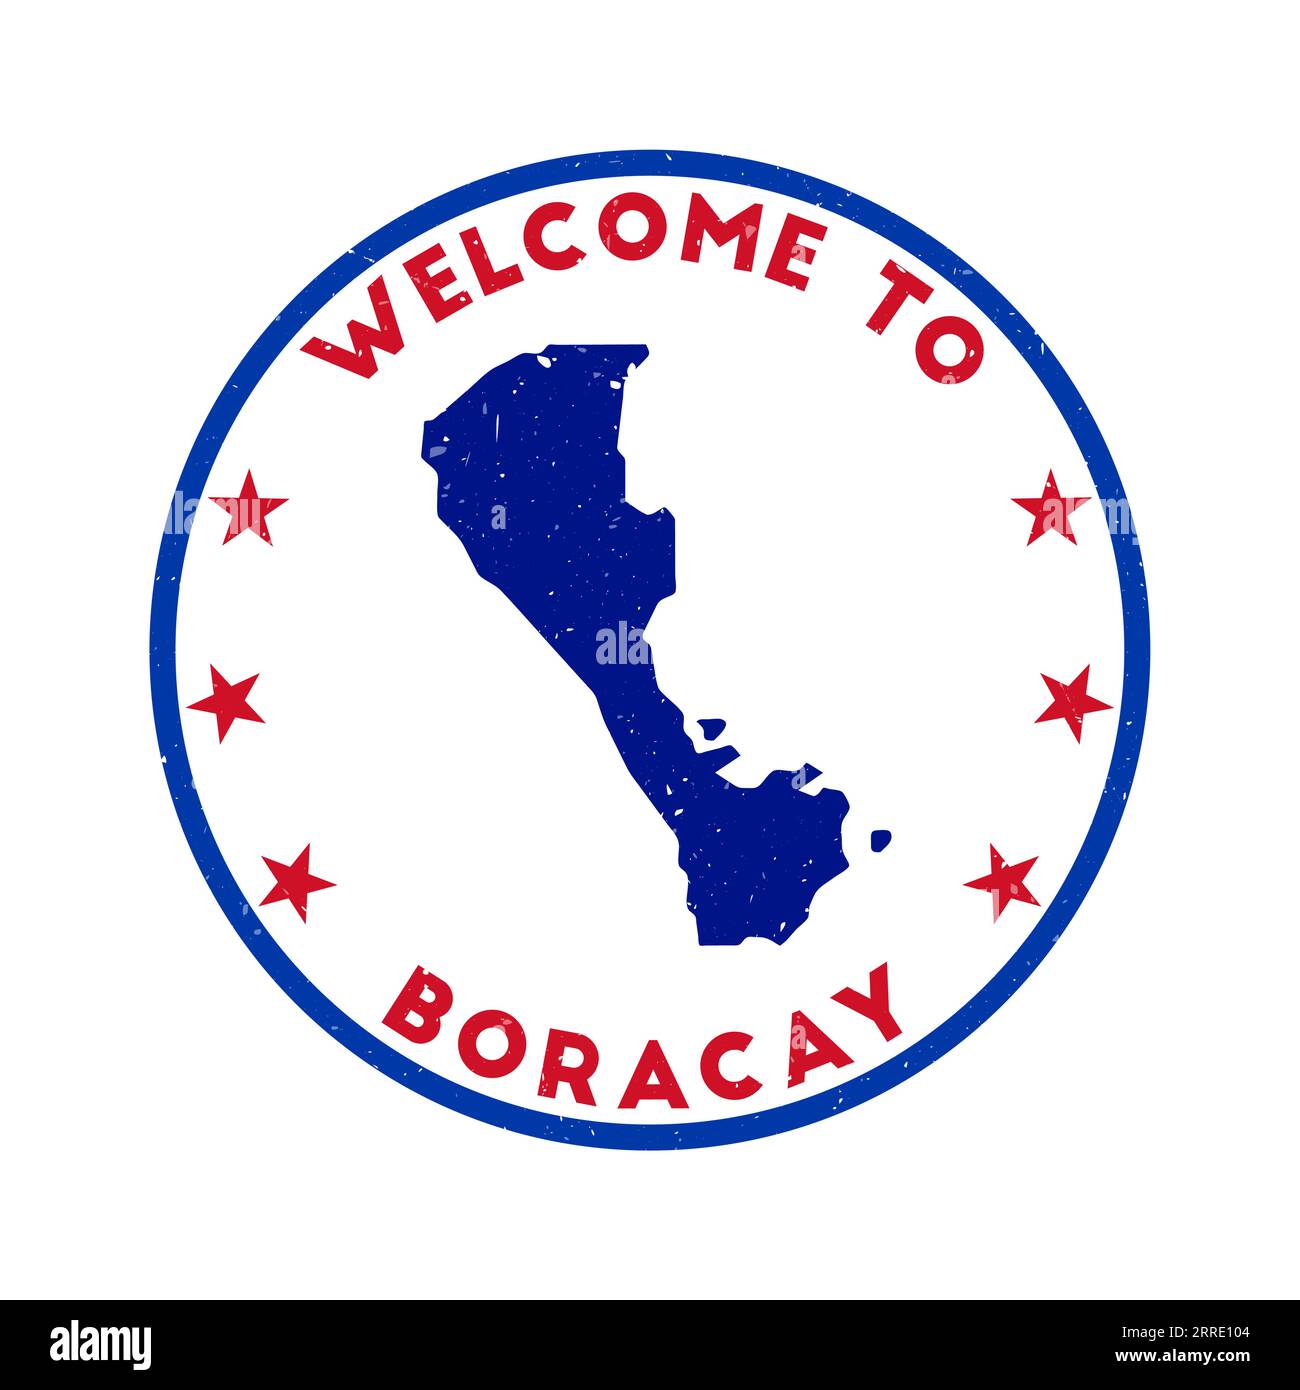 Welcome to Boracay stamp. Grunge island round stamp with texture in Super Rose Red color theme. Vintage style geometric Boracay seal. Neat vector illu Stock Vector